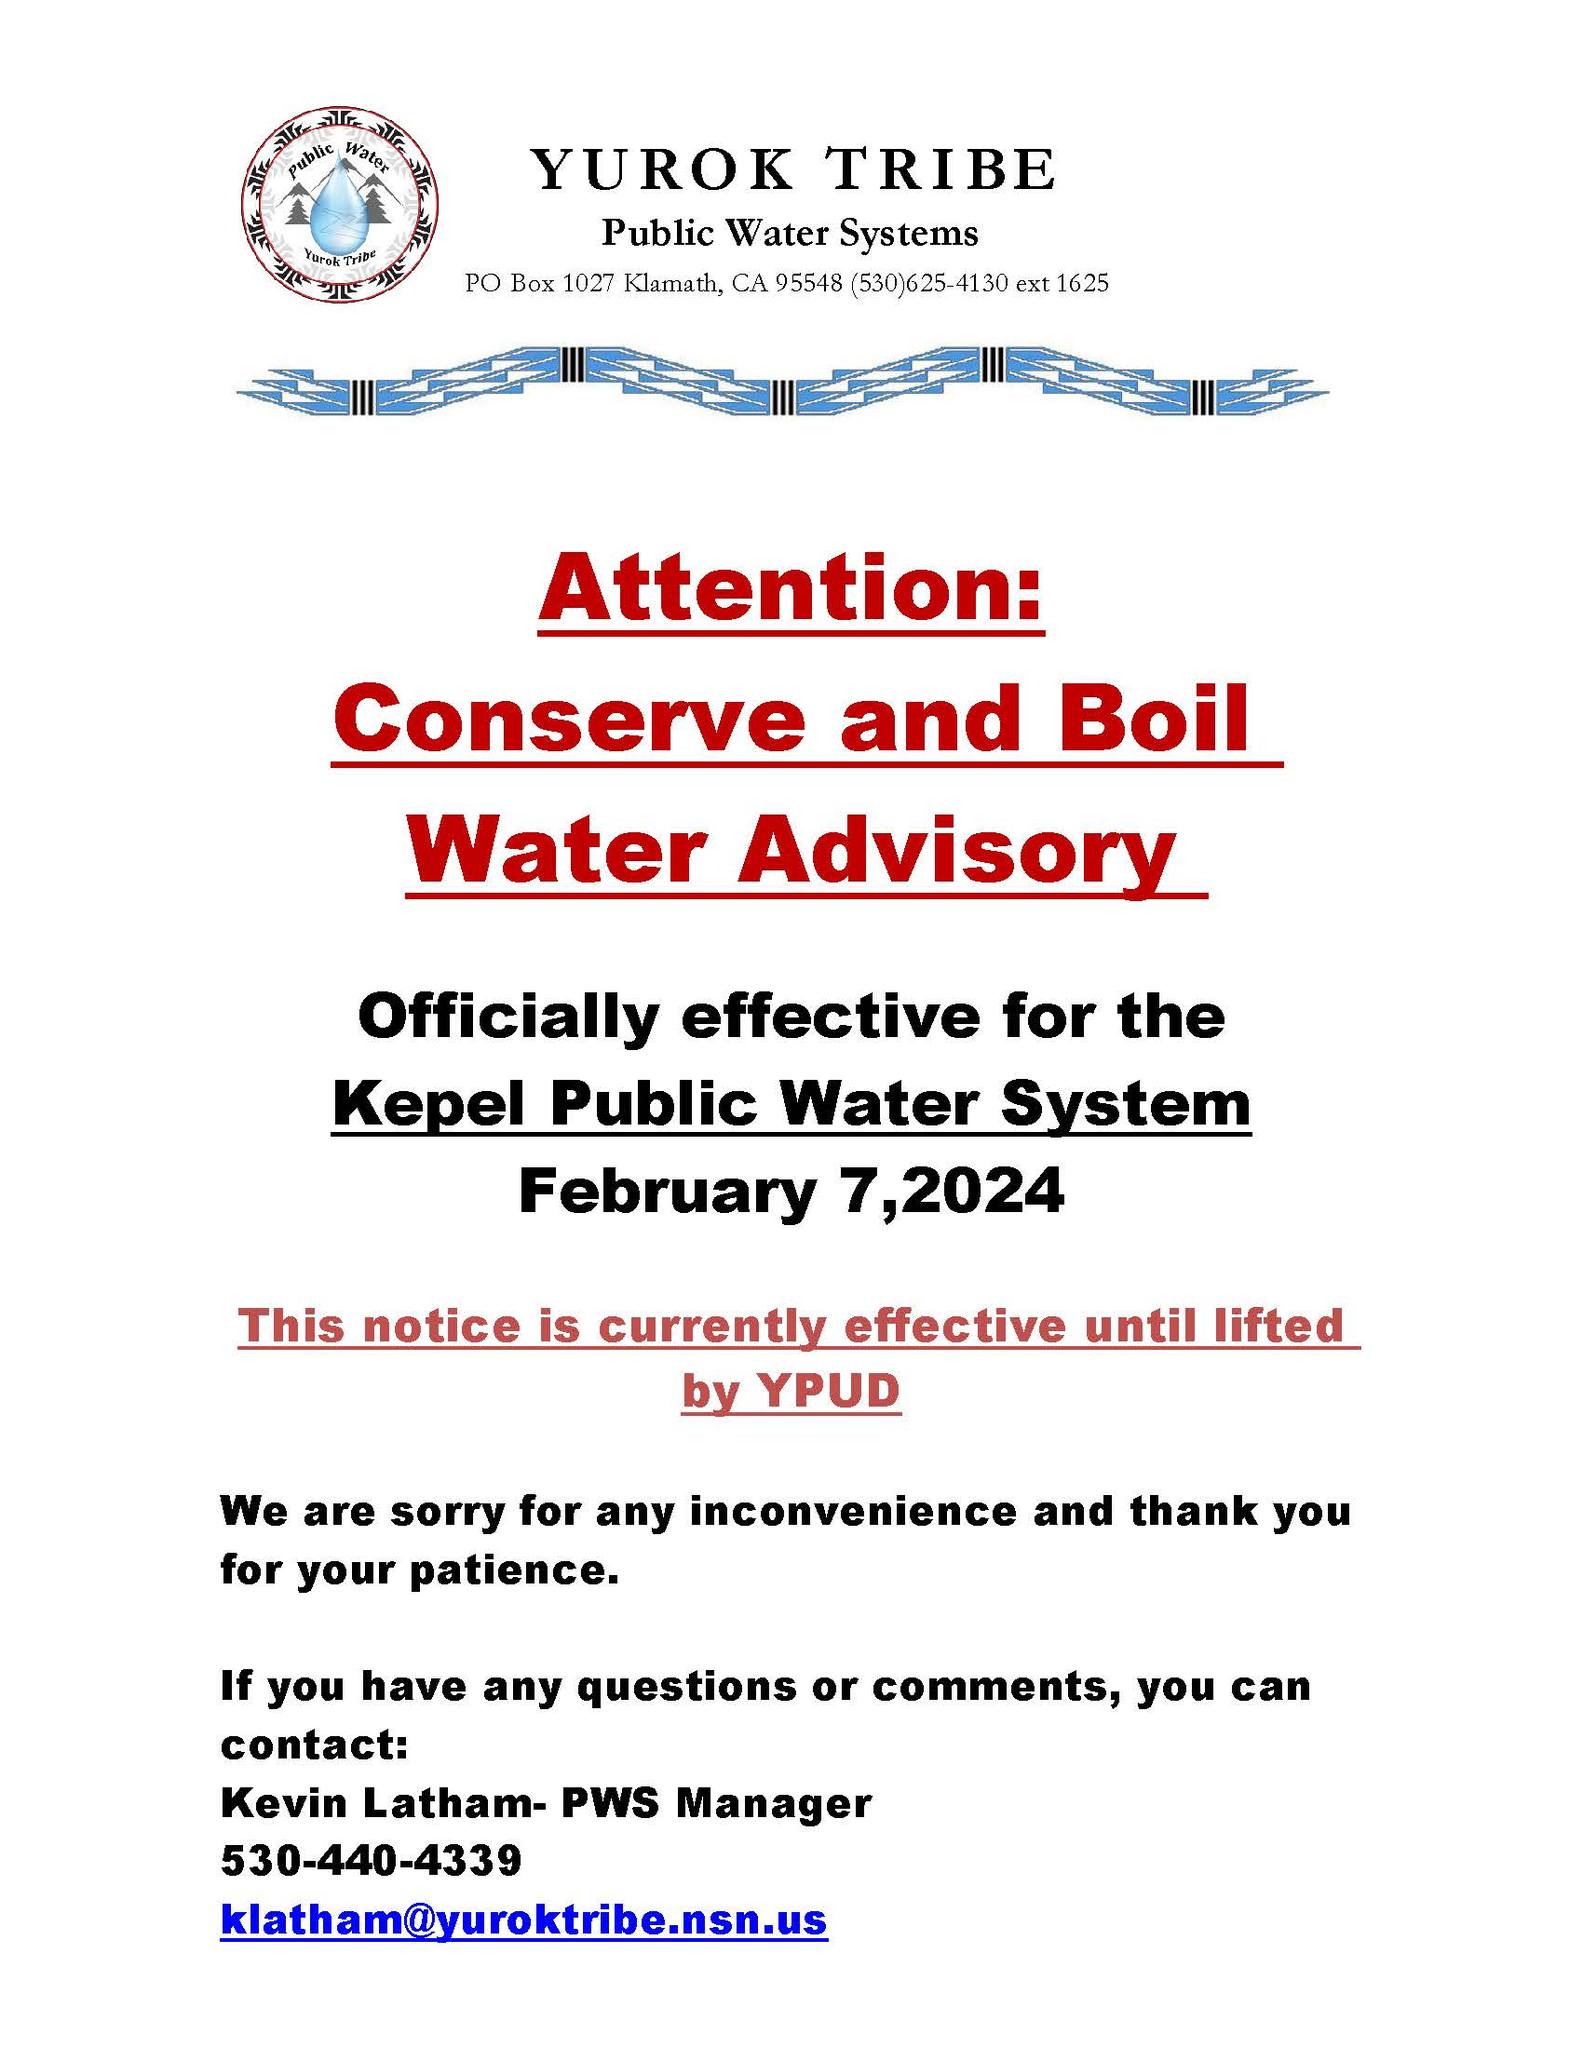 May be an image of body of water and text that says 'okTrid YUROK TRIBE Public Water Systems PO Box 1027 Klamath, CA 95548 (530)625-4130ext1625 625-4130 Attention: Conserve and Boil Water Advisory Officially effective for the Kepel Public Water System February 7,2024 This notice is currently effective until lifted by YPUD We are sorry for any inconvenience and thank you for your patience. If you have any questions or comments, you can contact: Kevin Latham- PWS Manager 530-440-4339 klatham@yuroktribe.nsn.us'